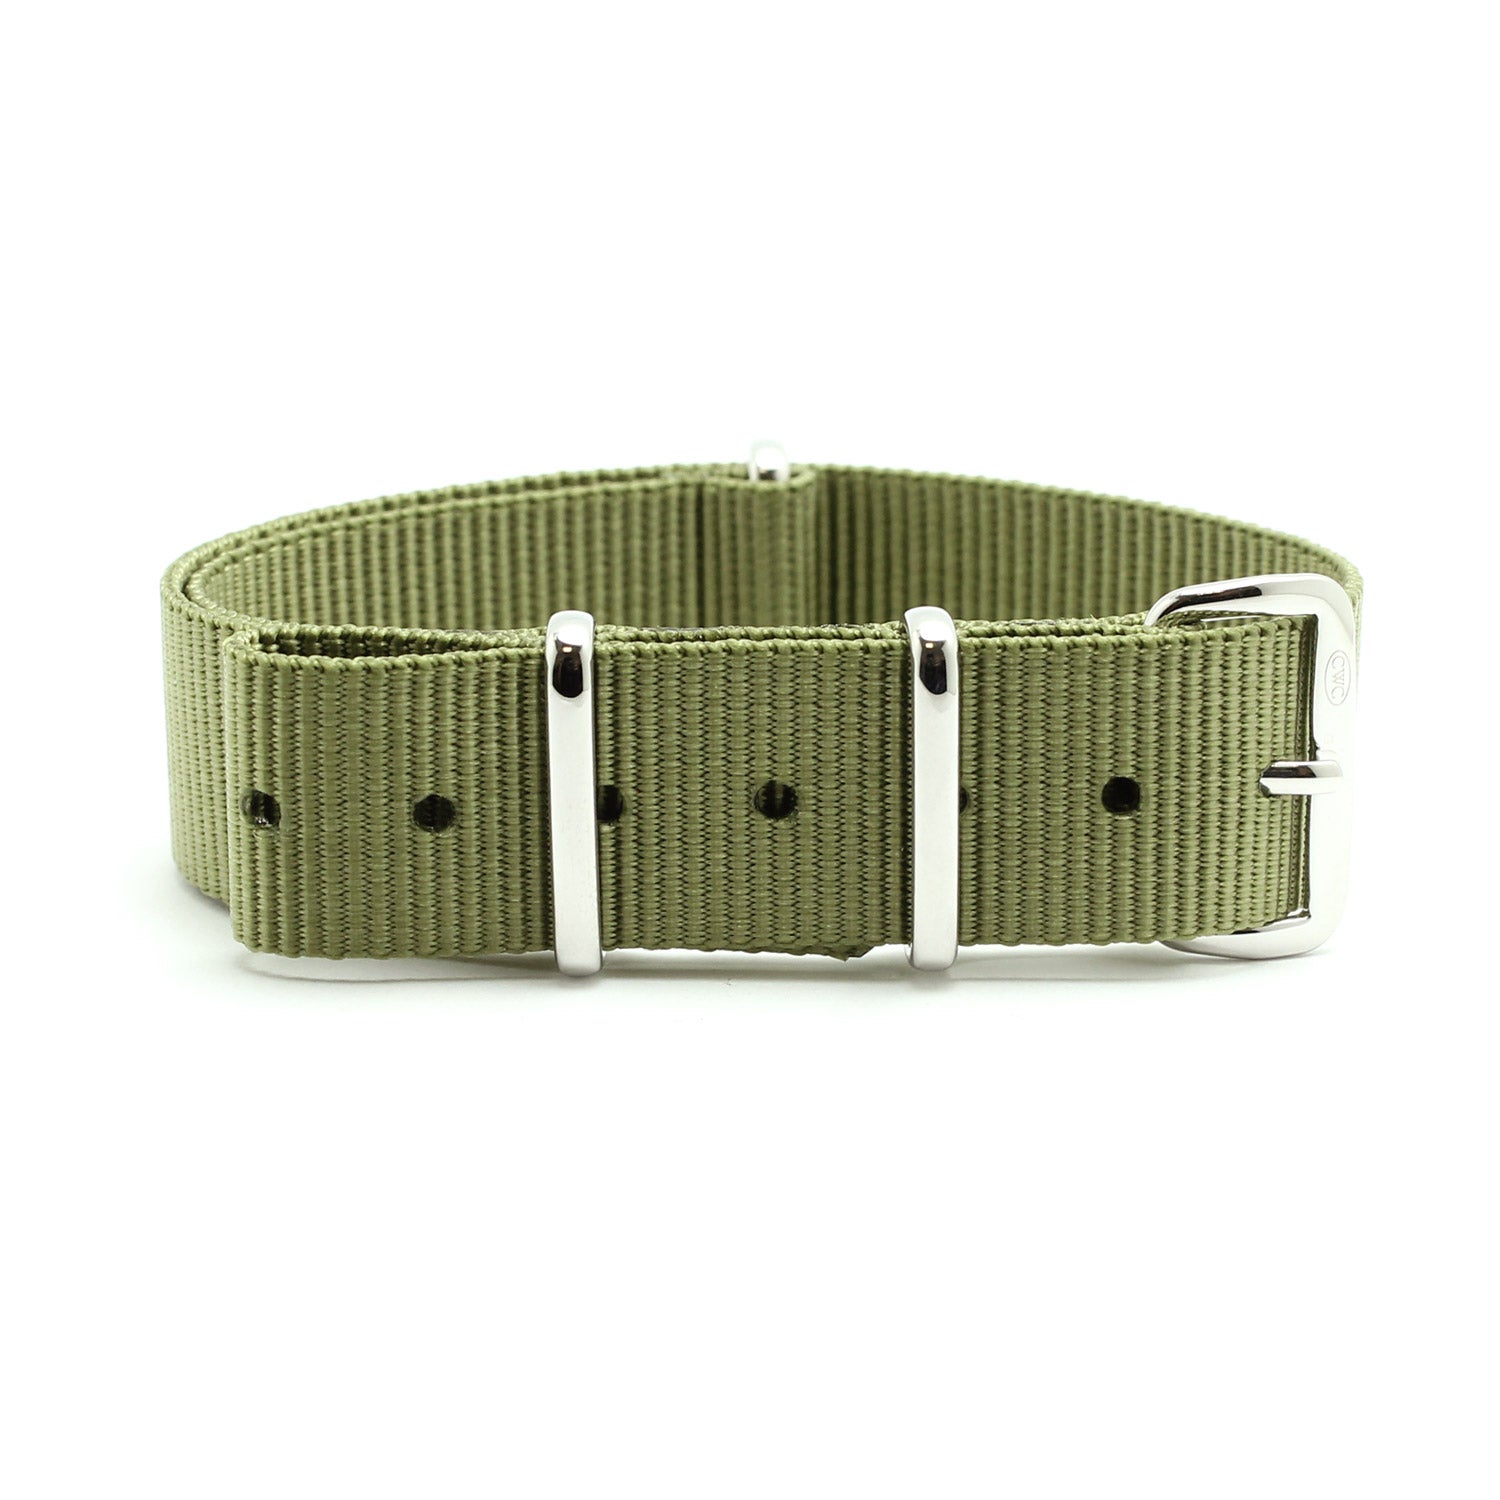 CABOT MILITARY WATCH STRAP - LIGHT GREEN WITH GLOSS SILVER BUCKLE